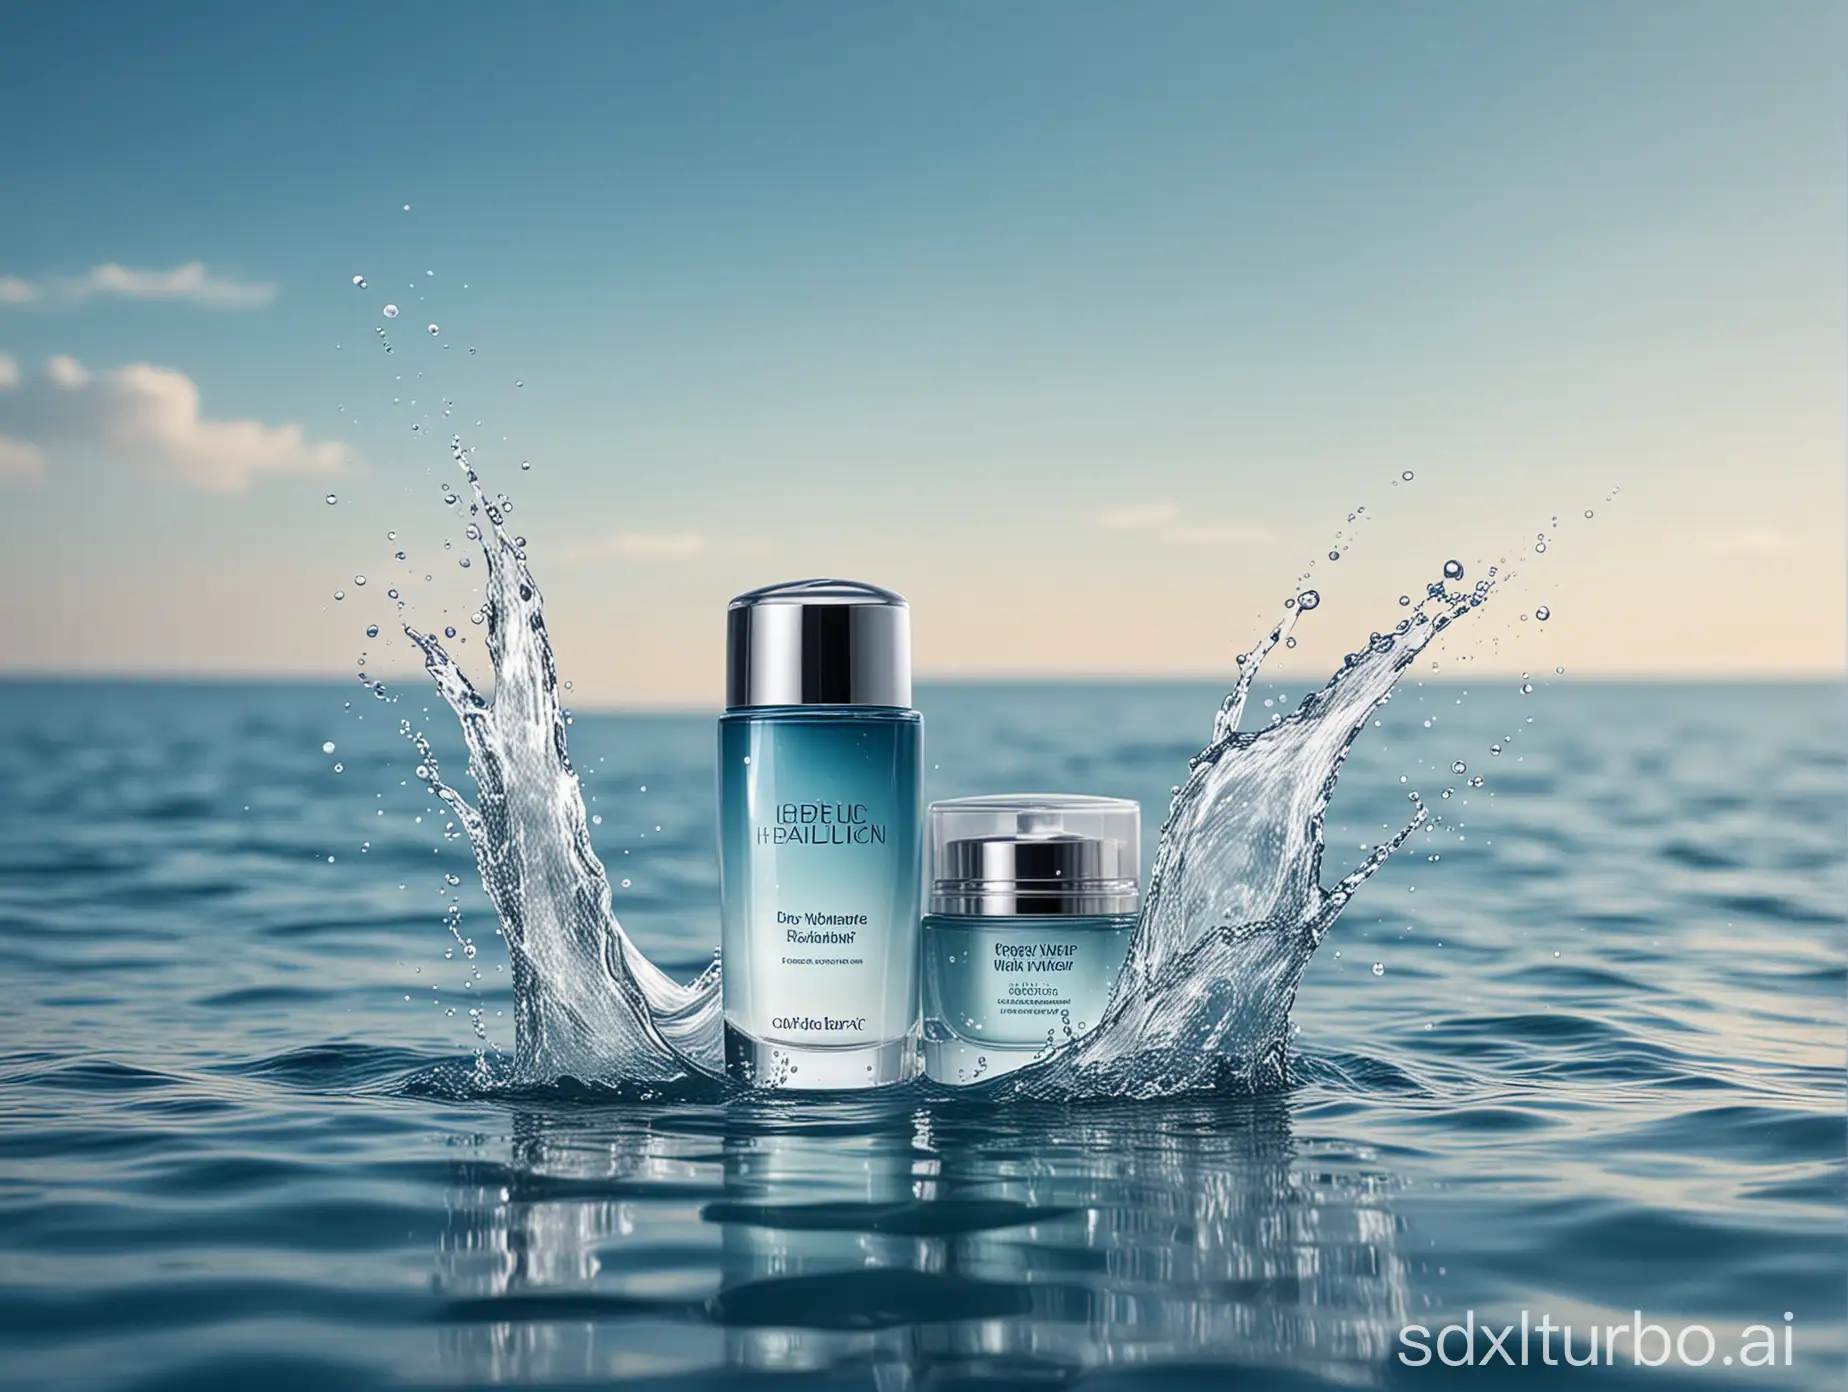 Glamorous-Makeup-Ad-Beauty-Products-Enhanced-by-Glistening-Water